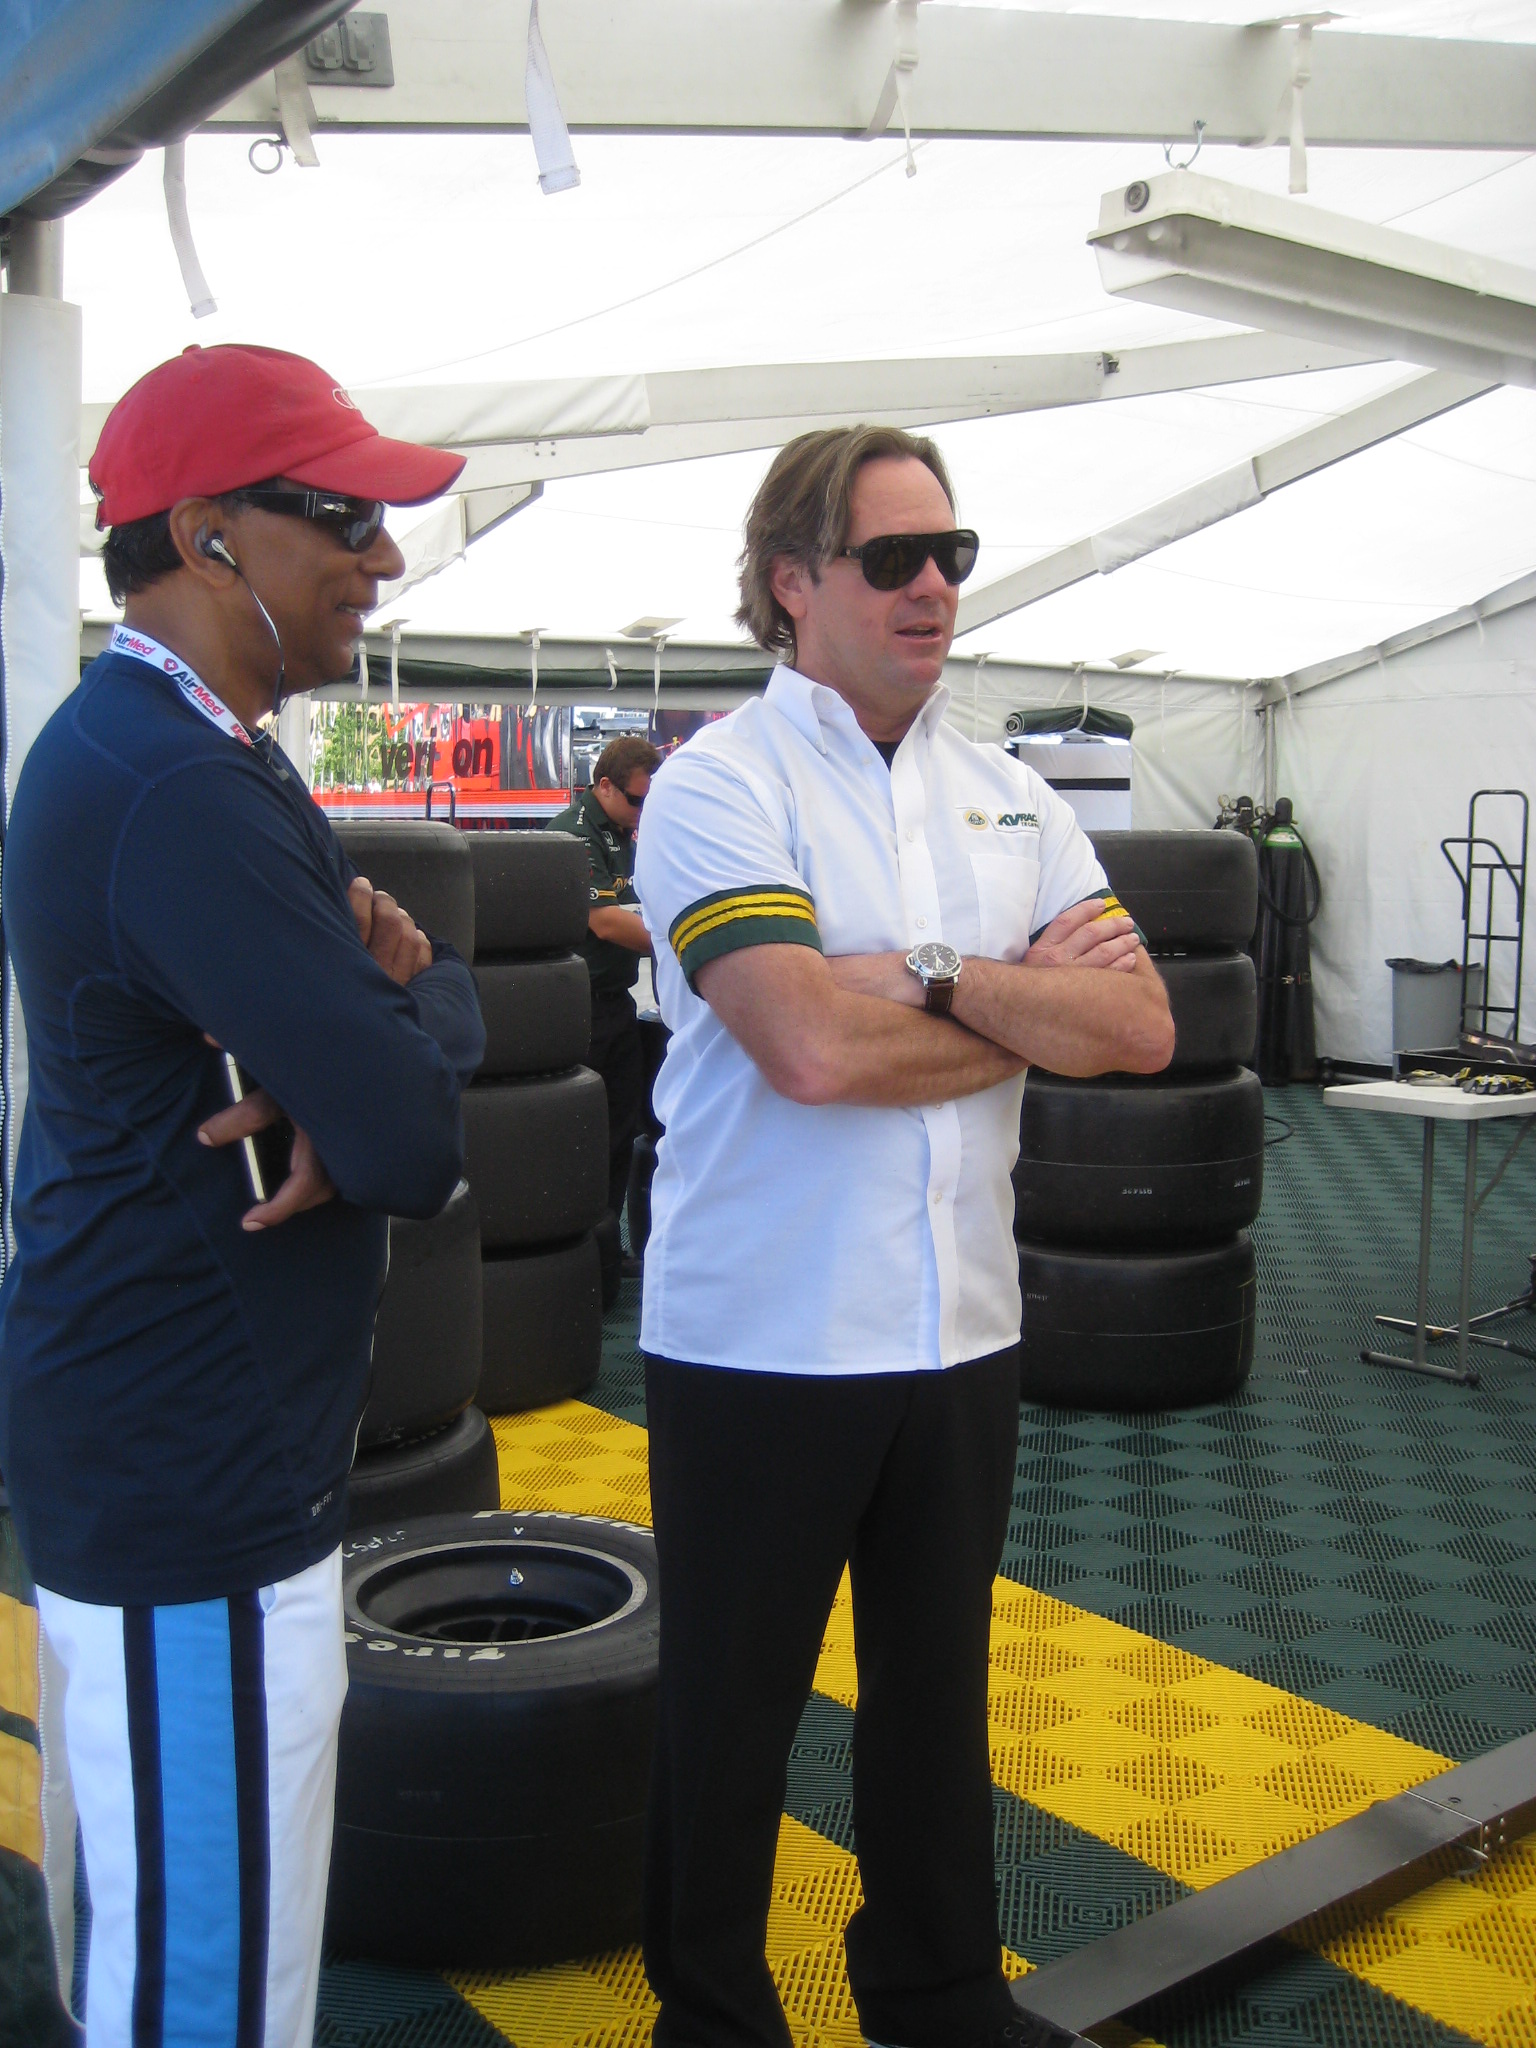 Timothy Khan with Jimmy Vasser Team Owner and Former Driver at Honda Indy 2011